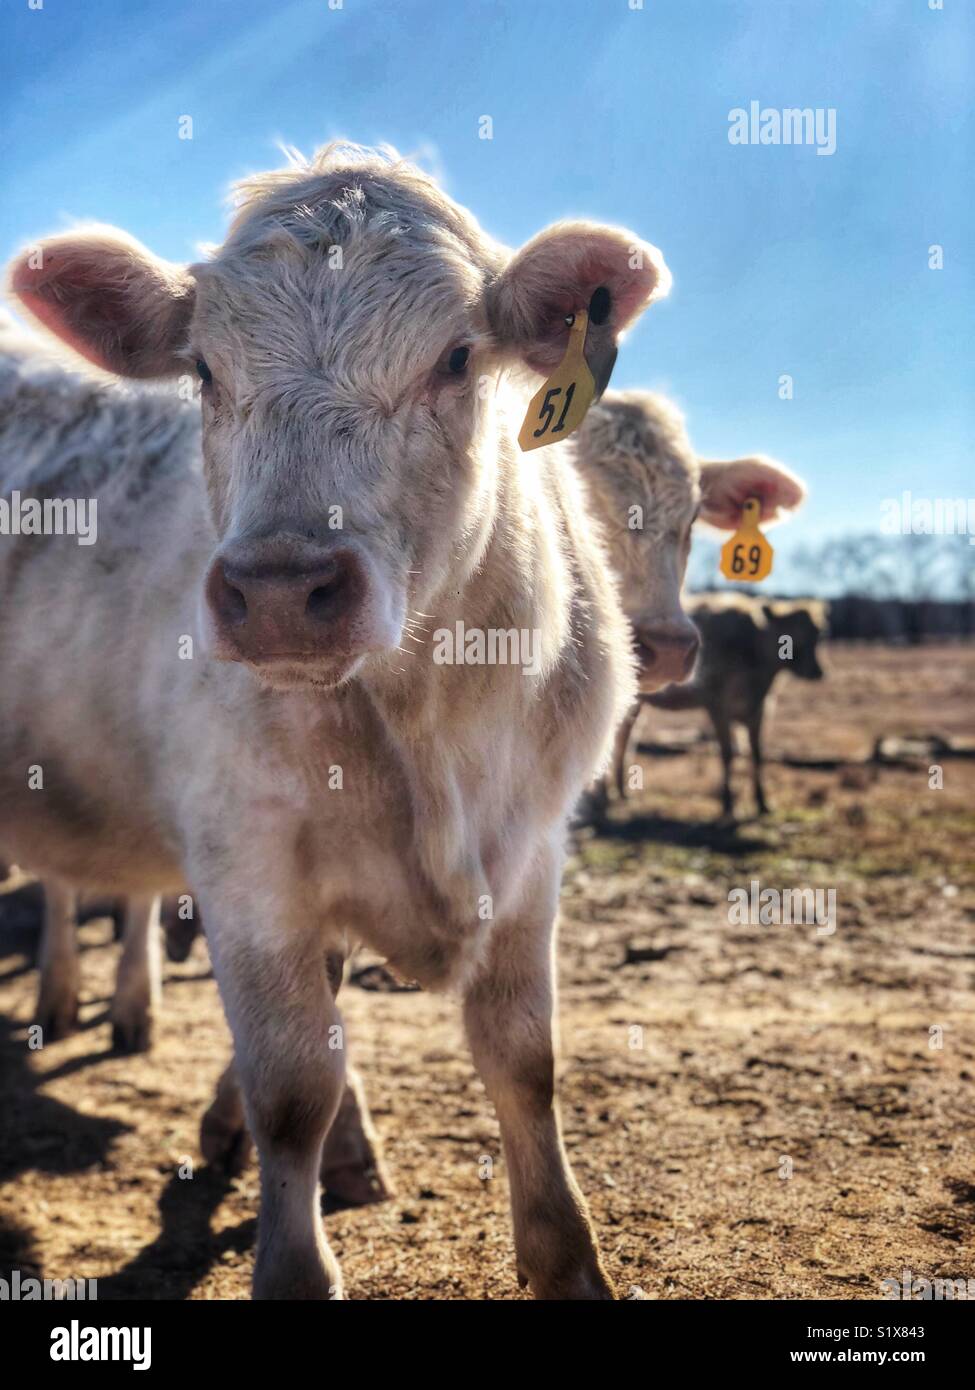 Up close and personal with a cow Stock Photo